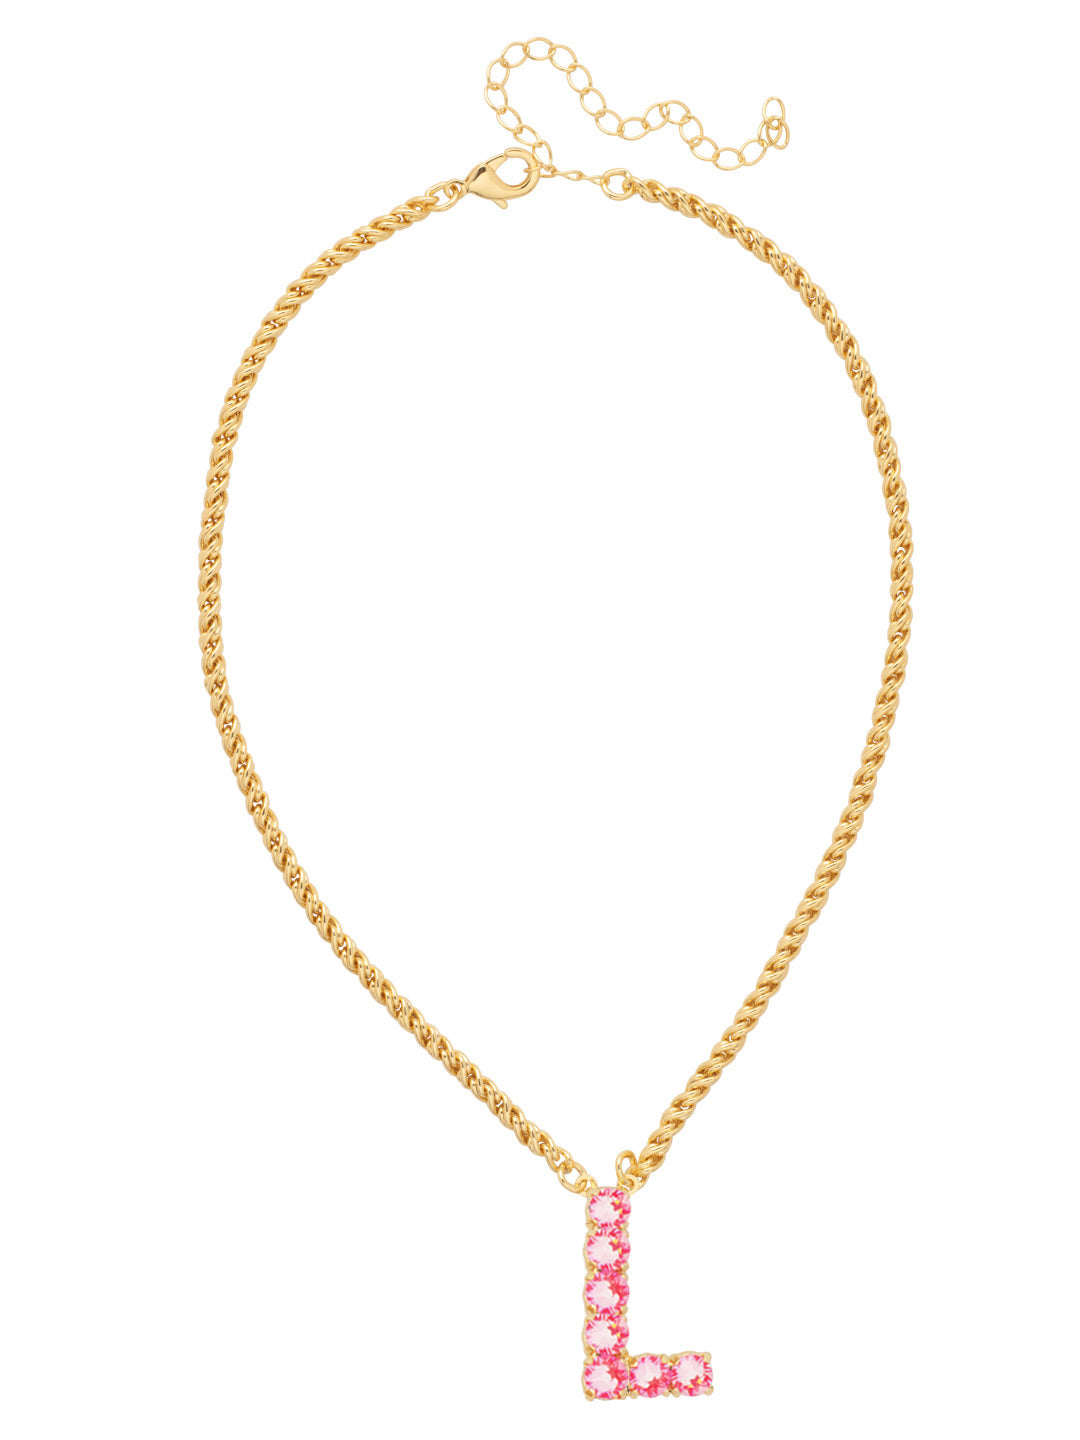 L Initial Rope Pendant Necklace - NFK31BGETP - <p>The Initial Rope Pendant Necklace features a crystal encrusted metal monogram pendant on an adjustable rope chain, secured with a lobster claw clasp. From Sorrelli's Electric Pink collection in our Bright Gold-tone finish.</p>